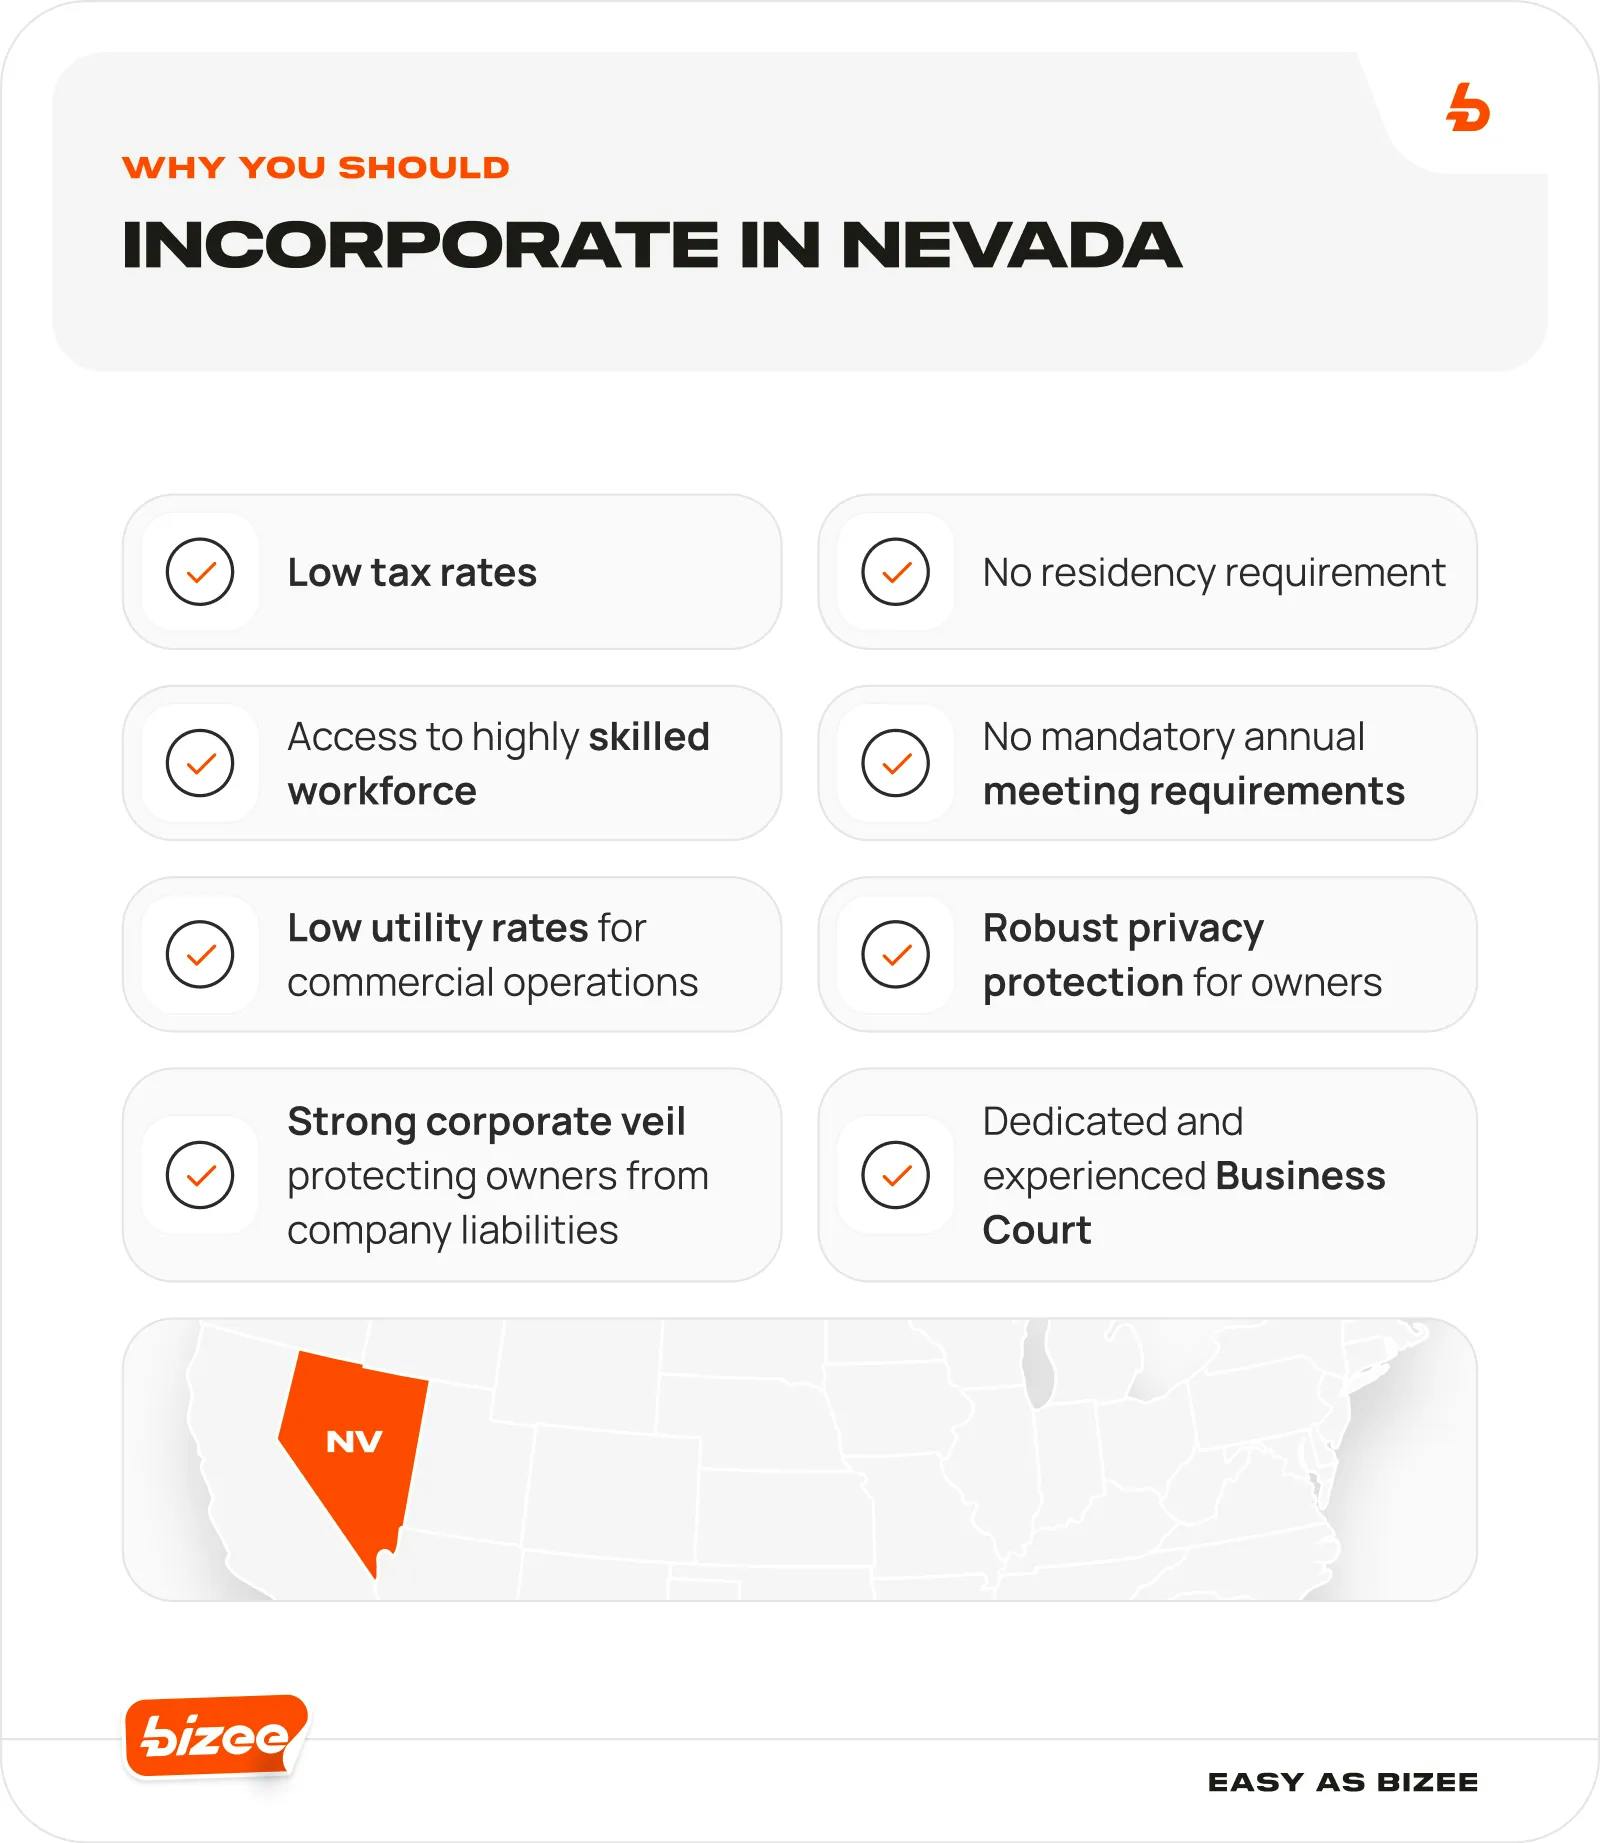 Why You Should Incorporate in Nevada